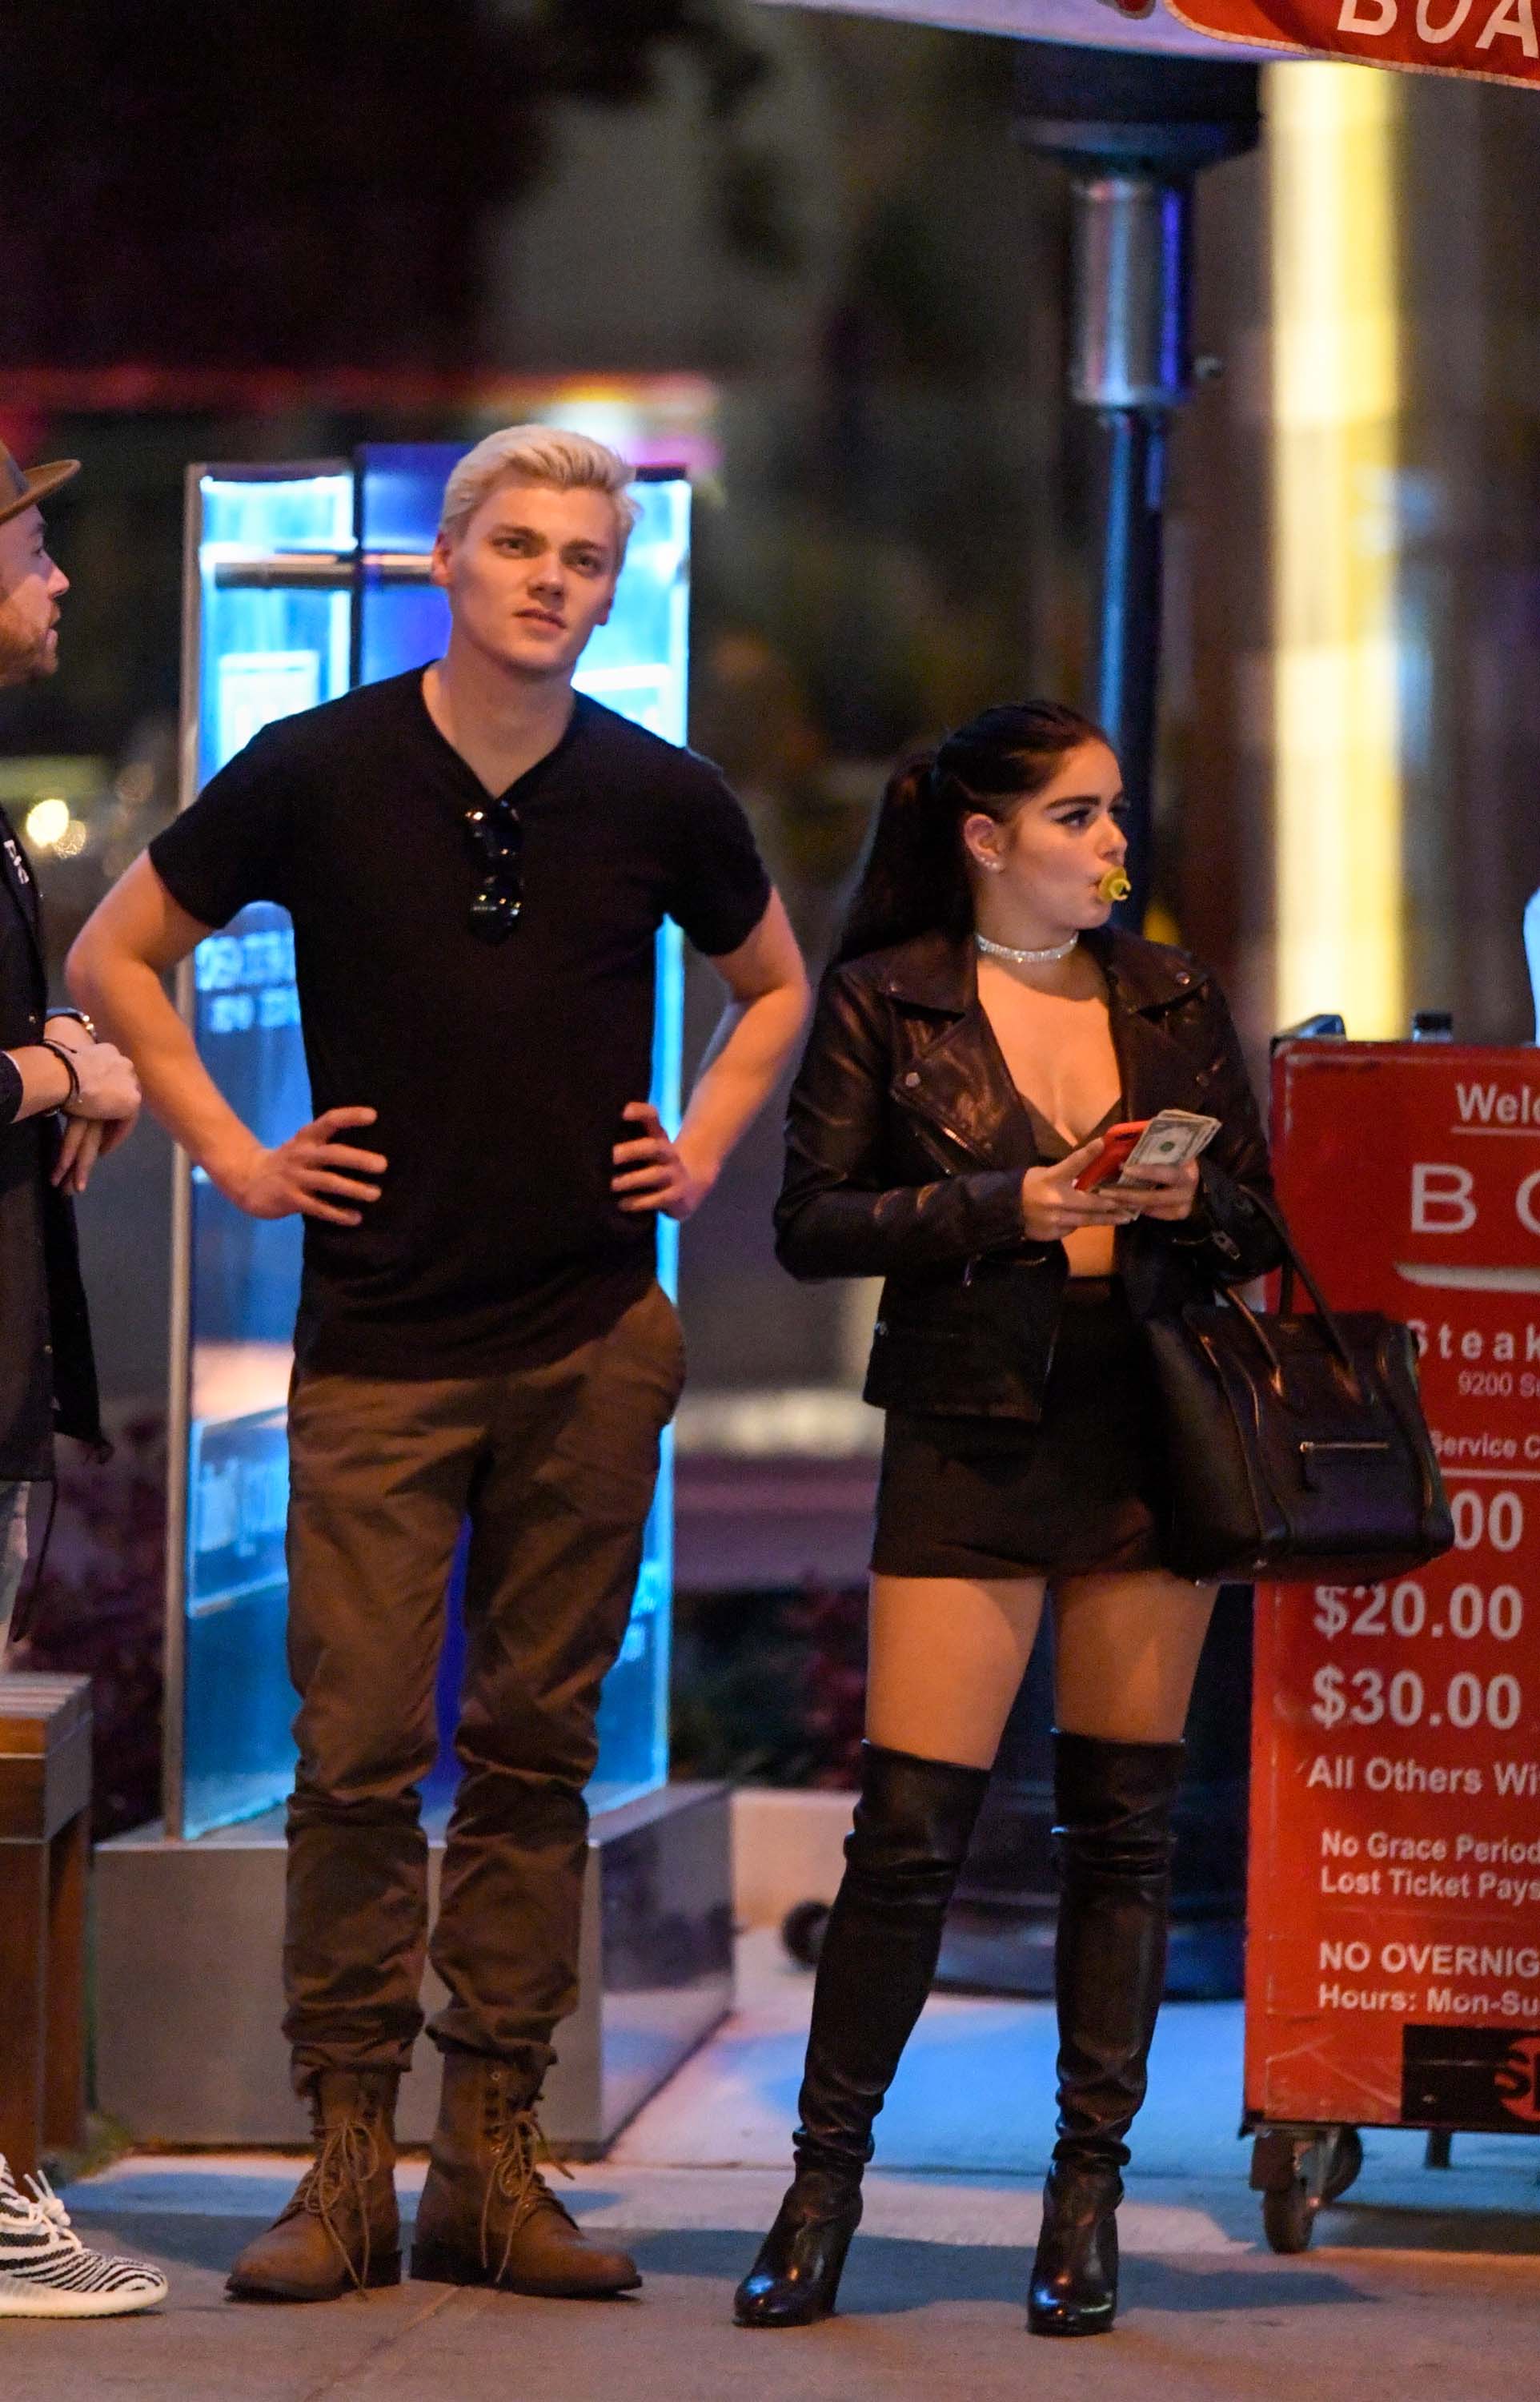 Ariel Winter waiting for the Valet at BOA